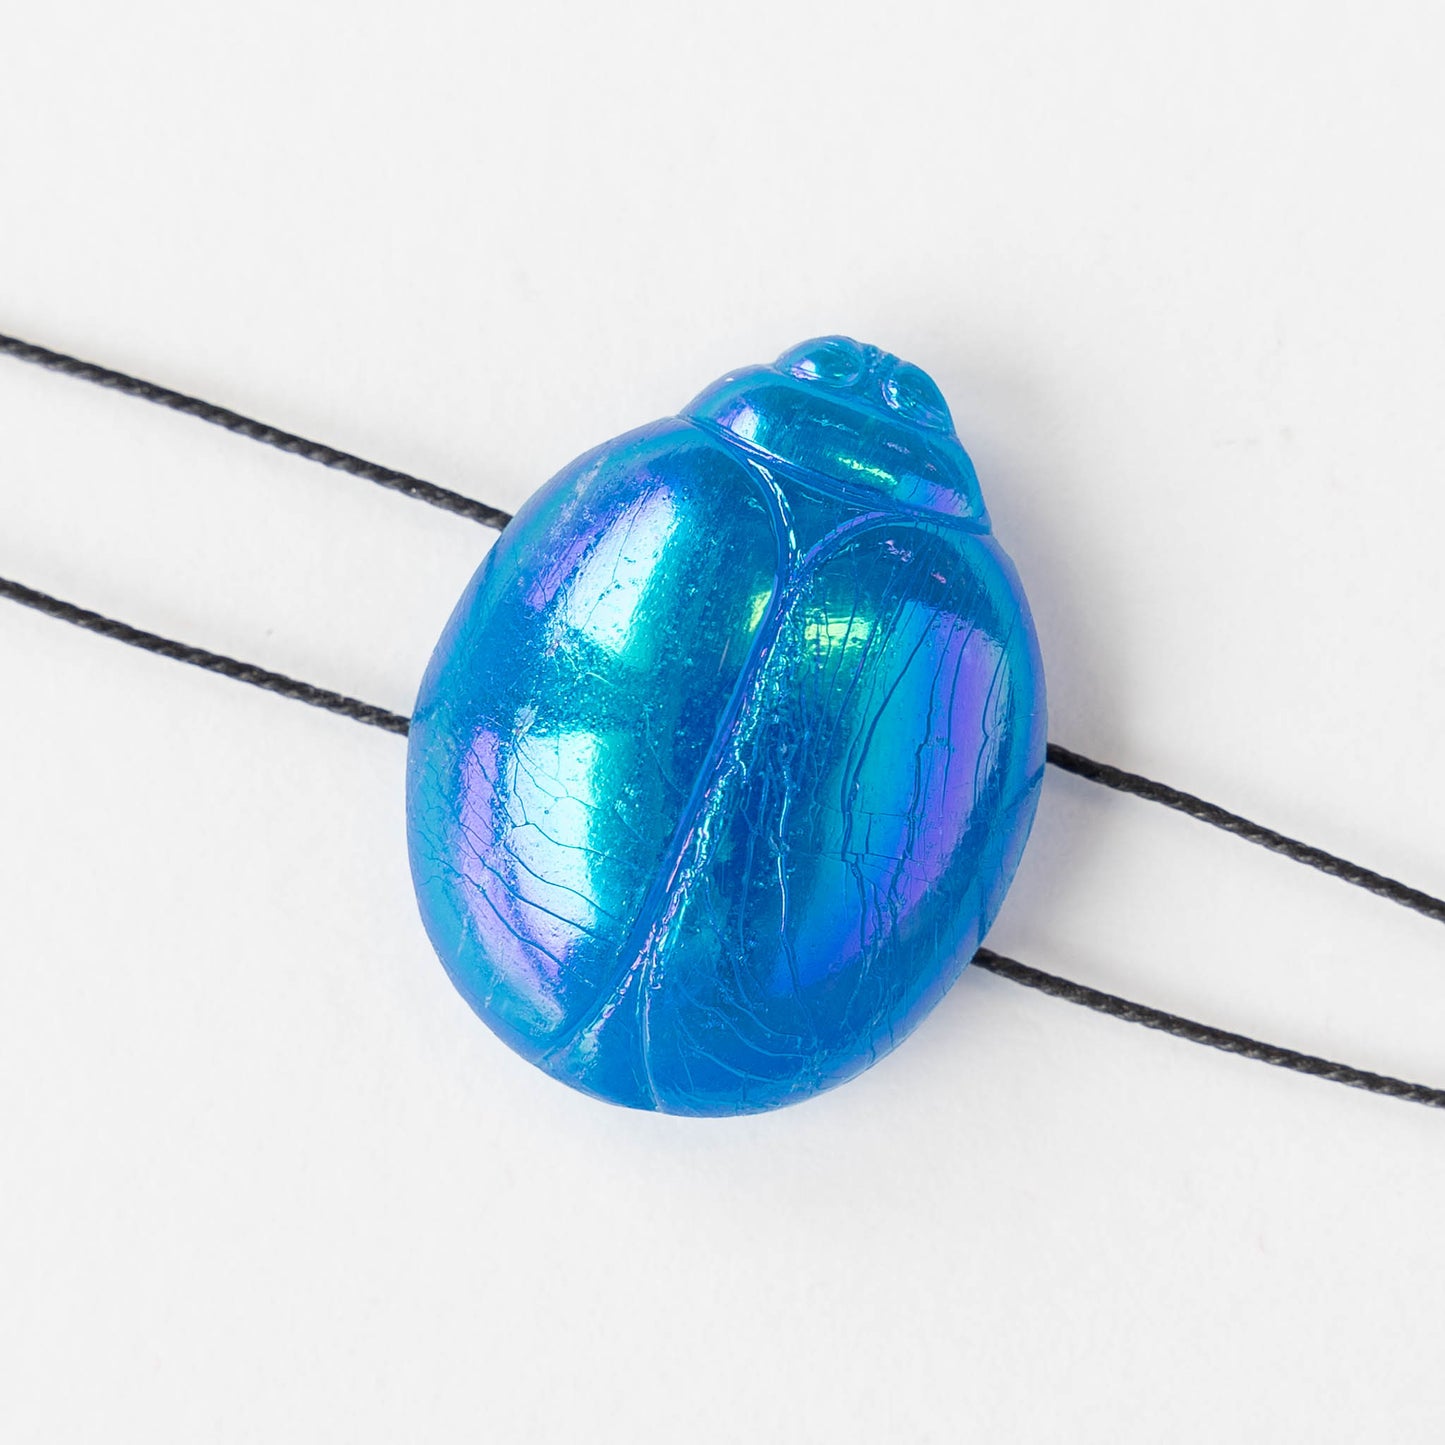 Glass Scarab Beads - Two Hole - Azure Blue AB - 2 beads